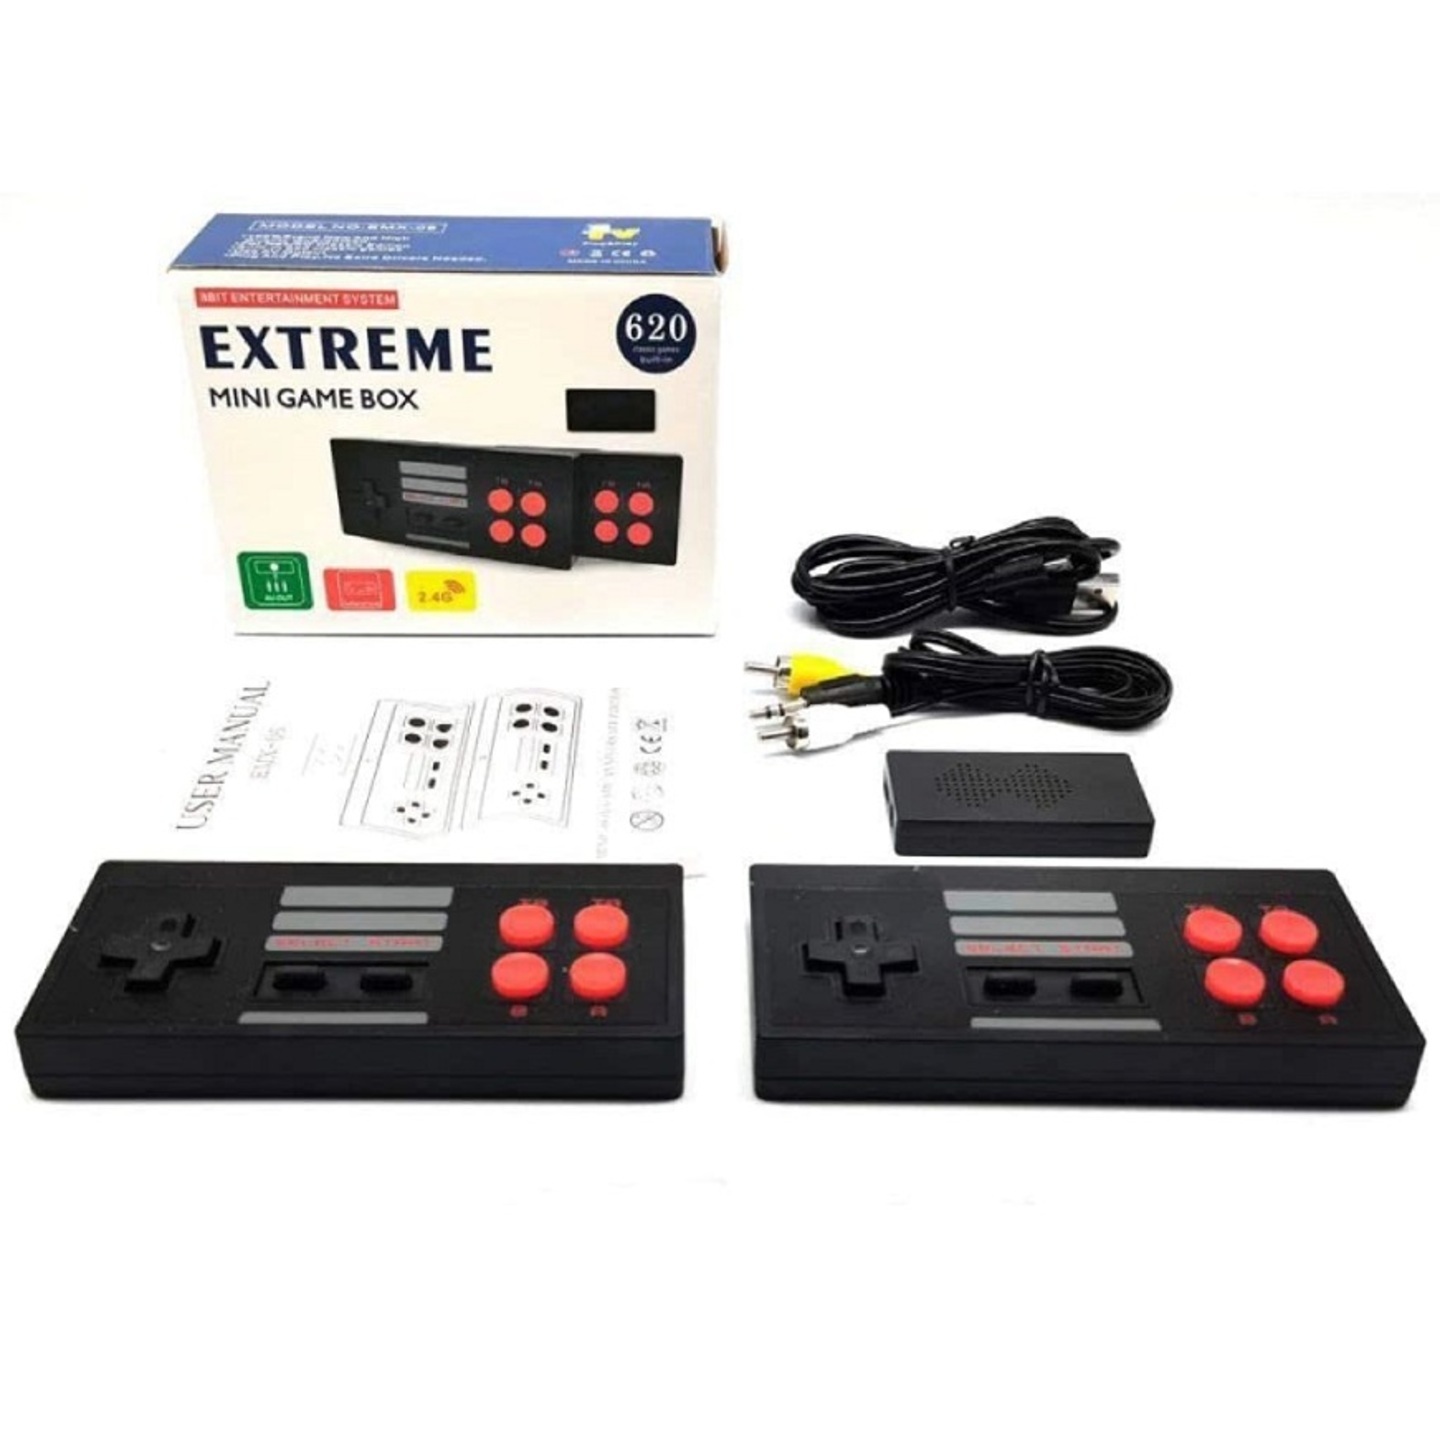 Extreme 2 player Wireless Video Game get with 620 games in Built